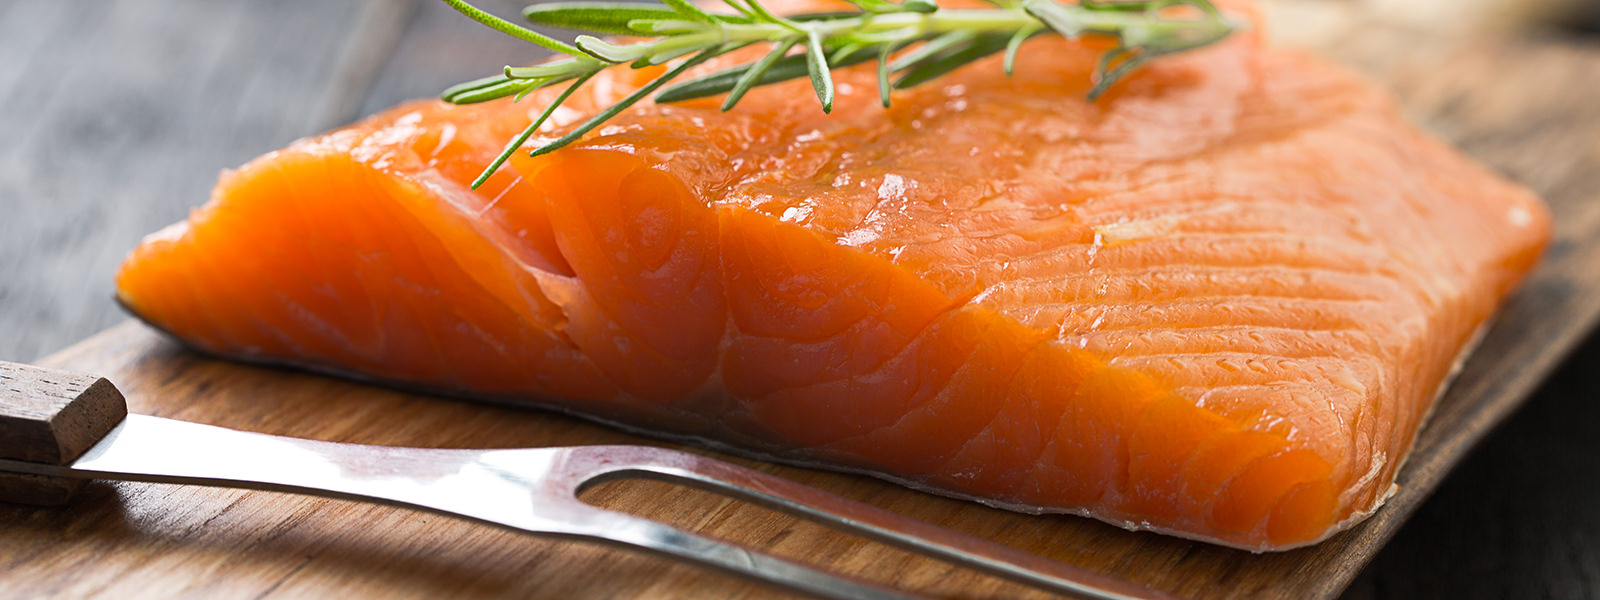 Smoked Salmon Market 2019 - Industry Outlook and Growth by 2024